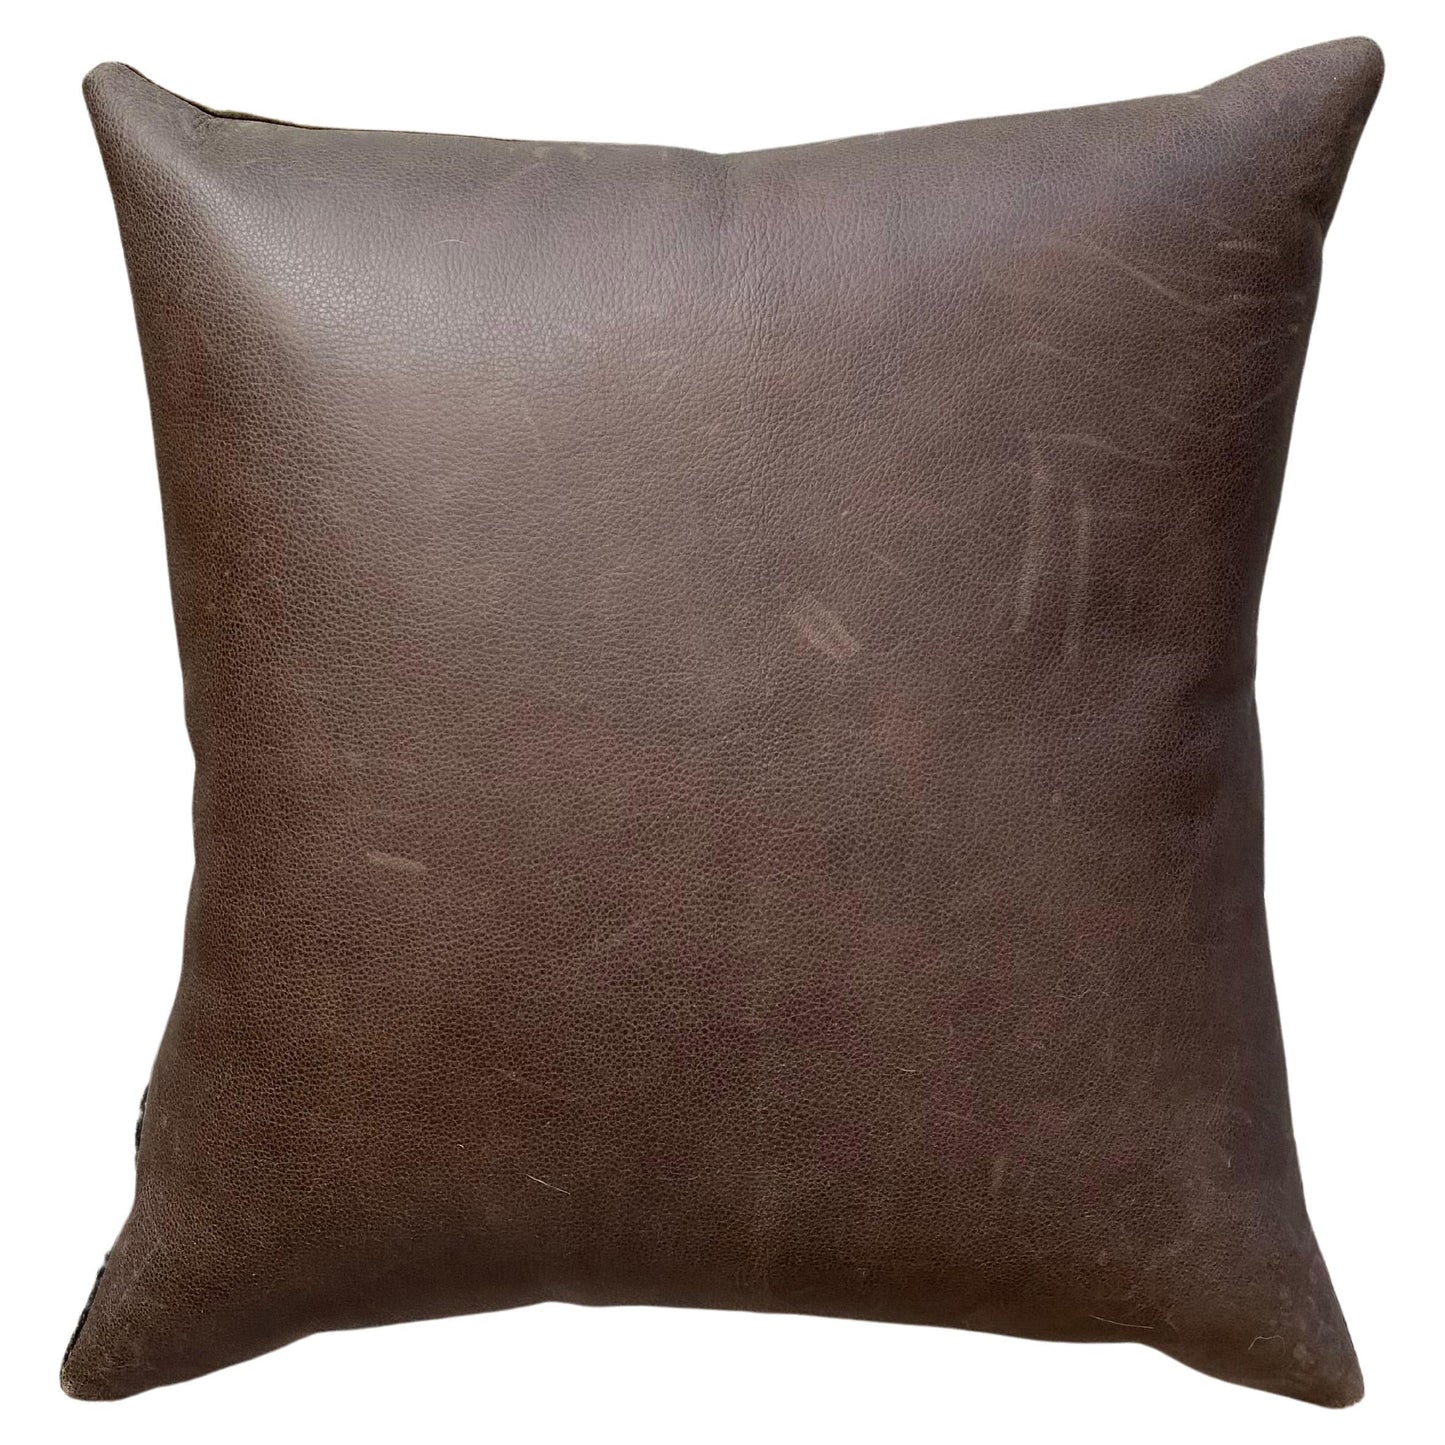 Velvet Fall Sky Pillow with Brown Leather Back